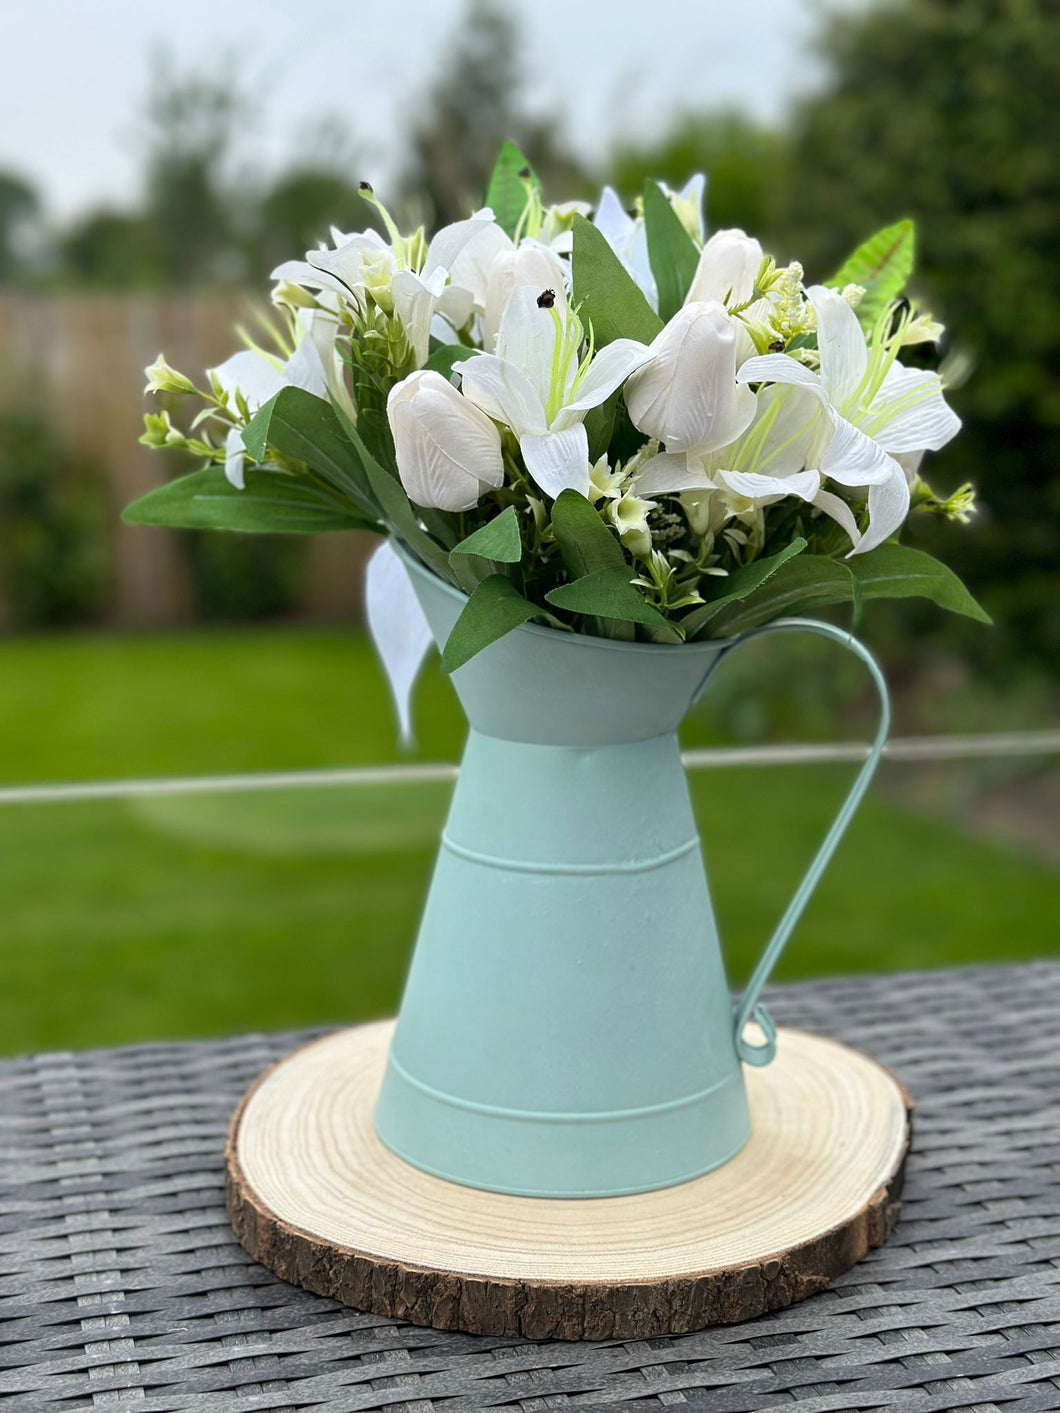 Luxury White Mixed Floral Display in Pastel Green Vase